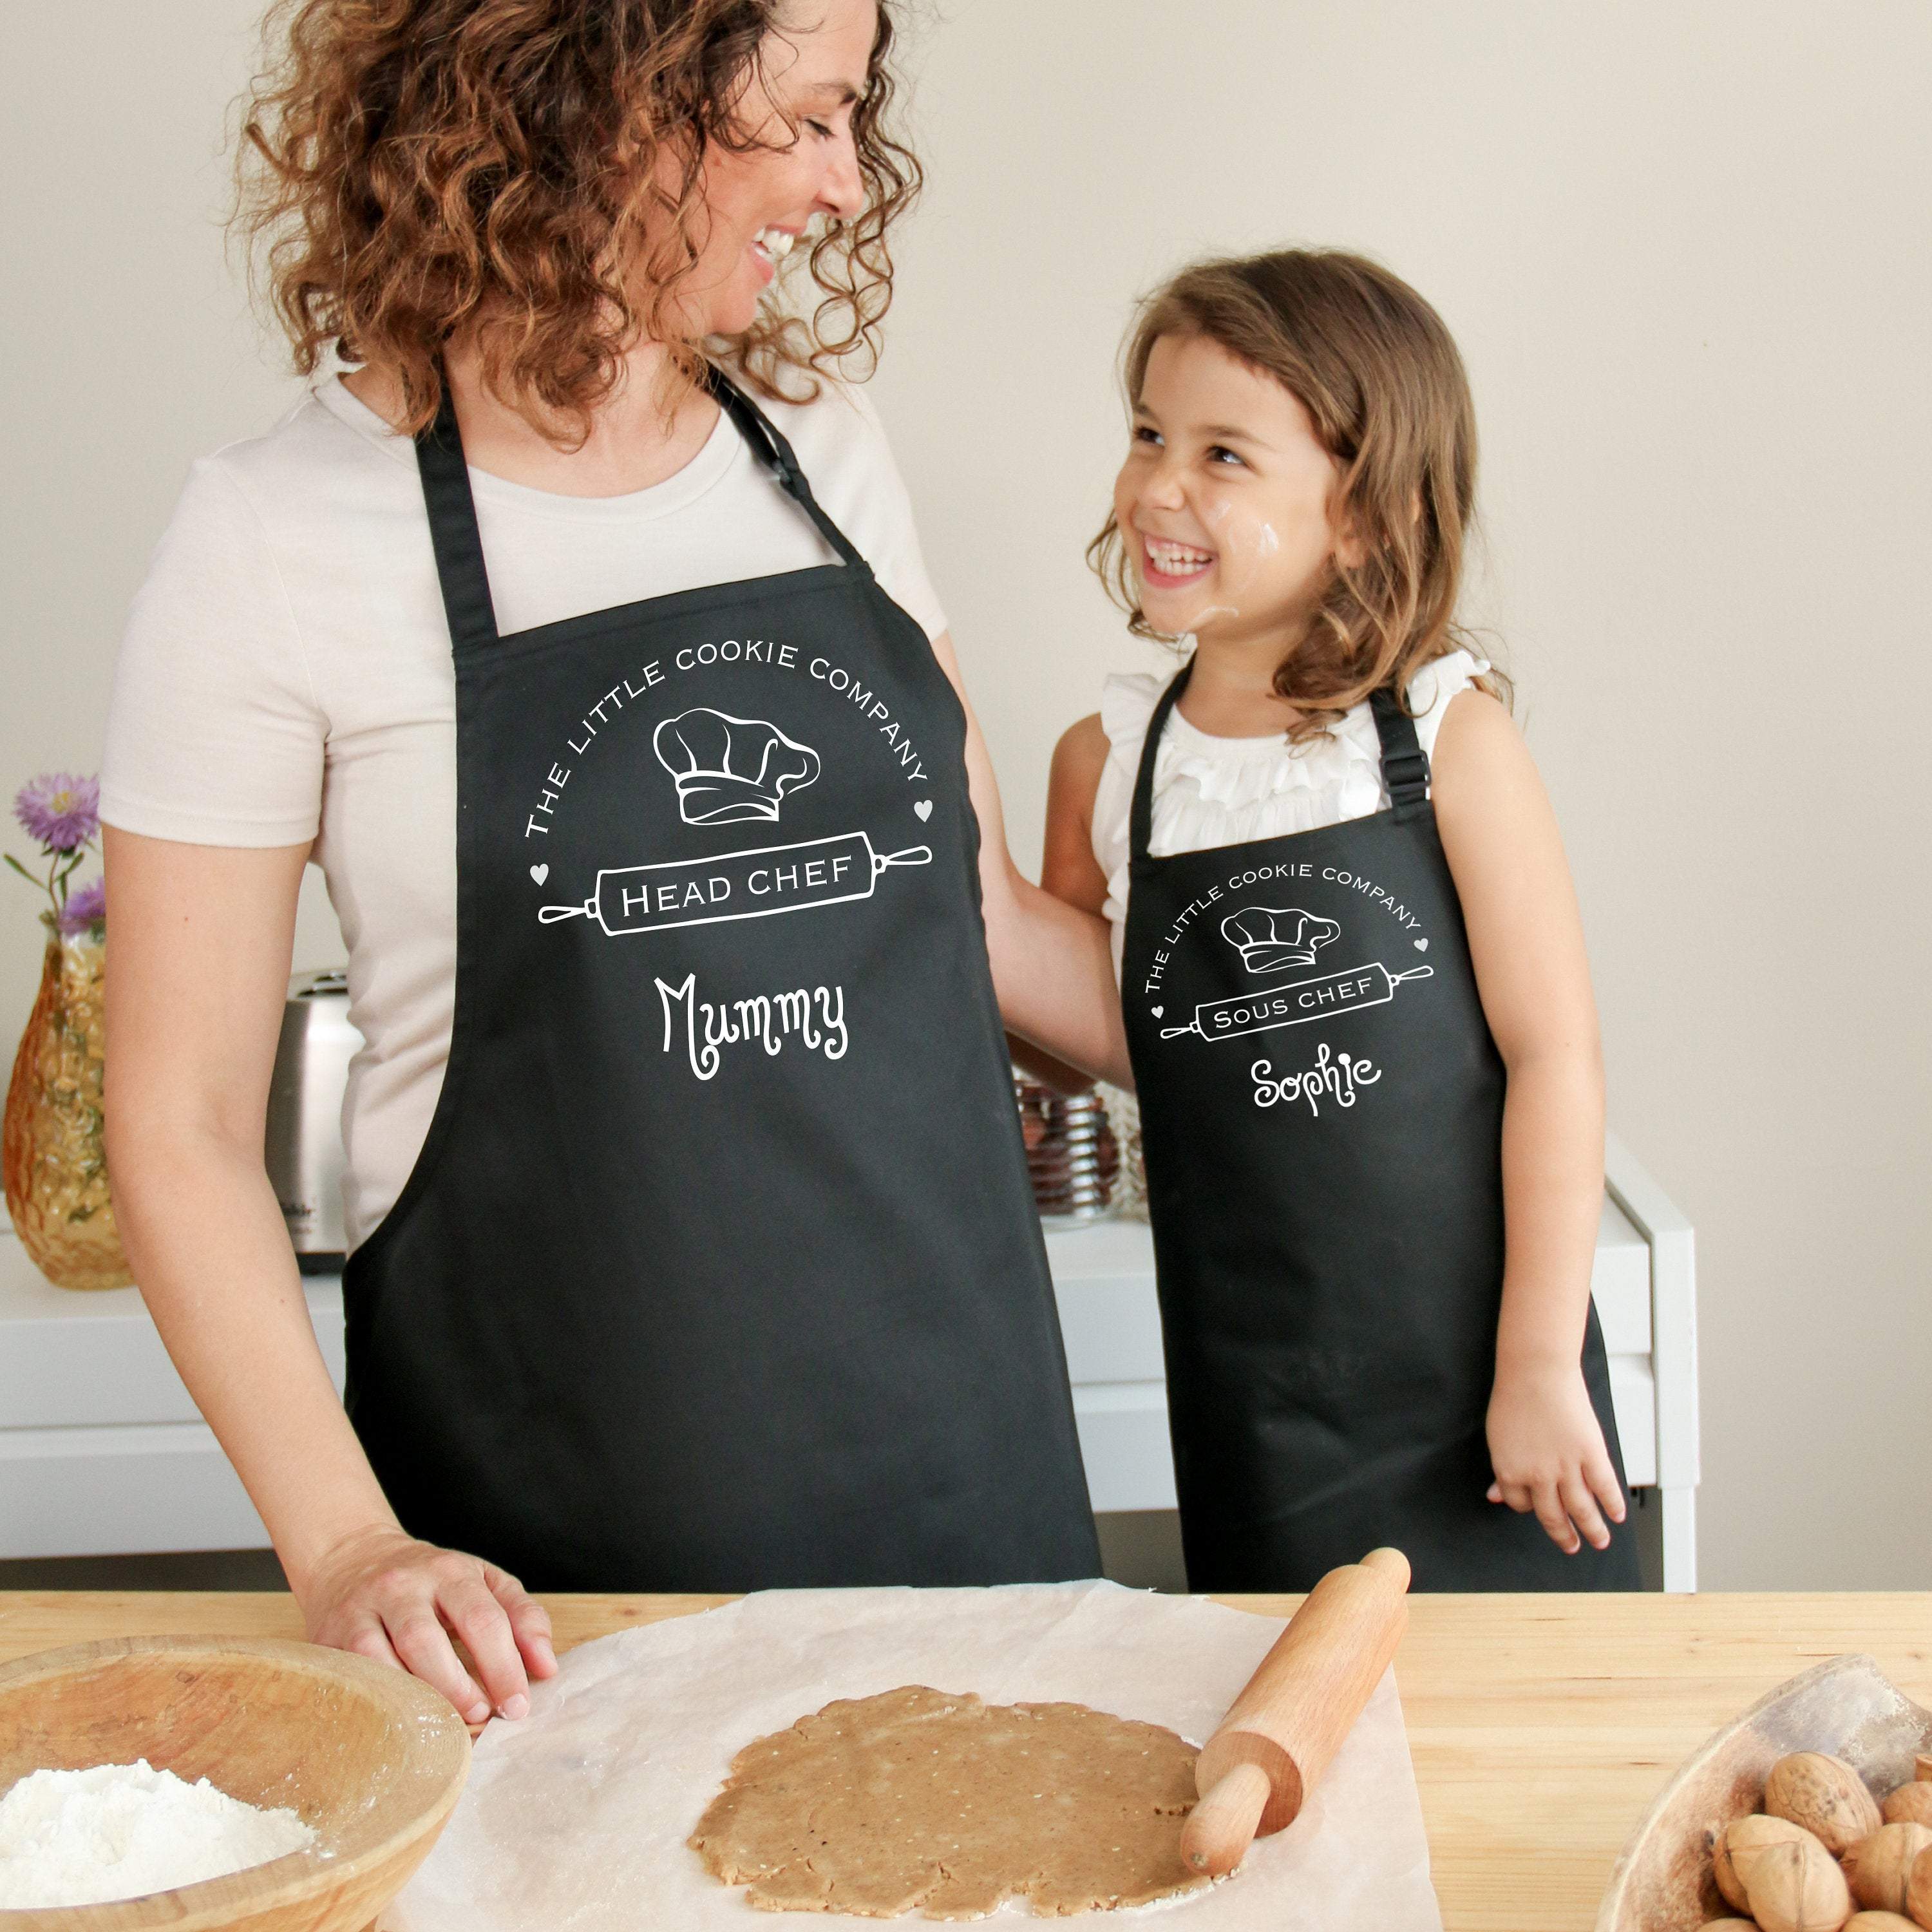 Personalised matching family apron with names, Head chef, sous chef mum and daughter aprons